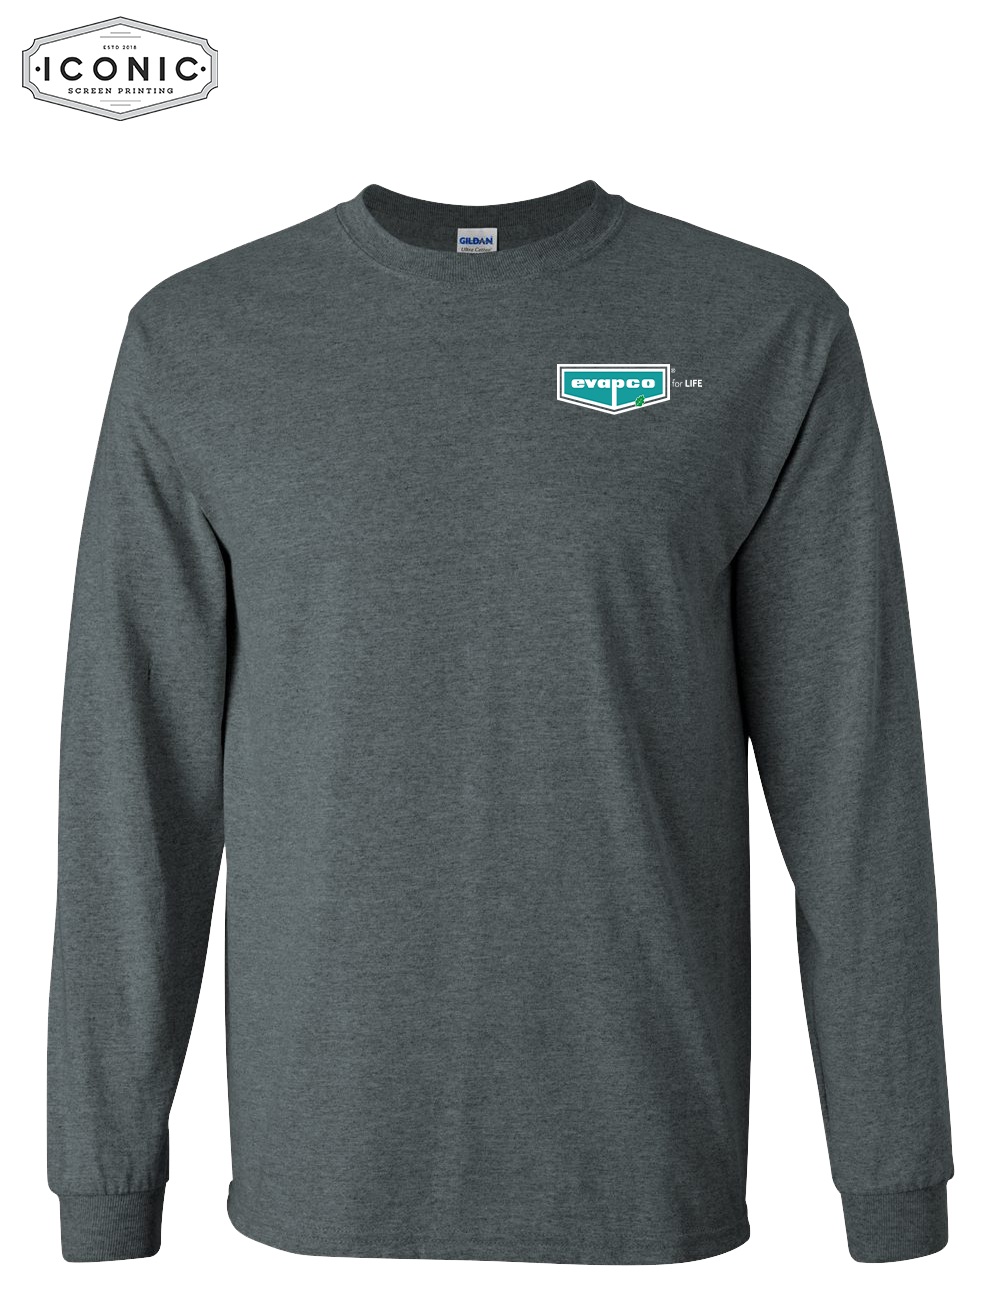 Evapco for Life - Ultra Cotton Long Sleeve - Print